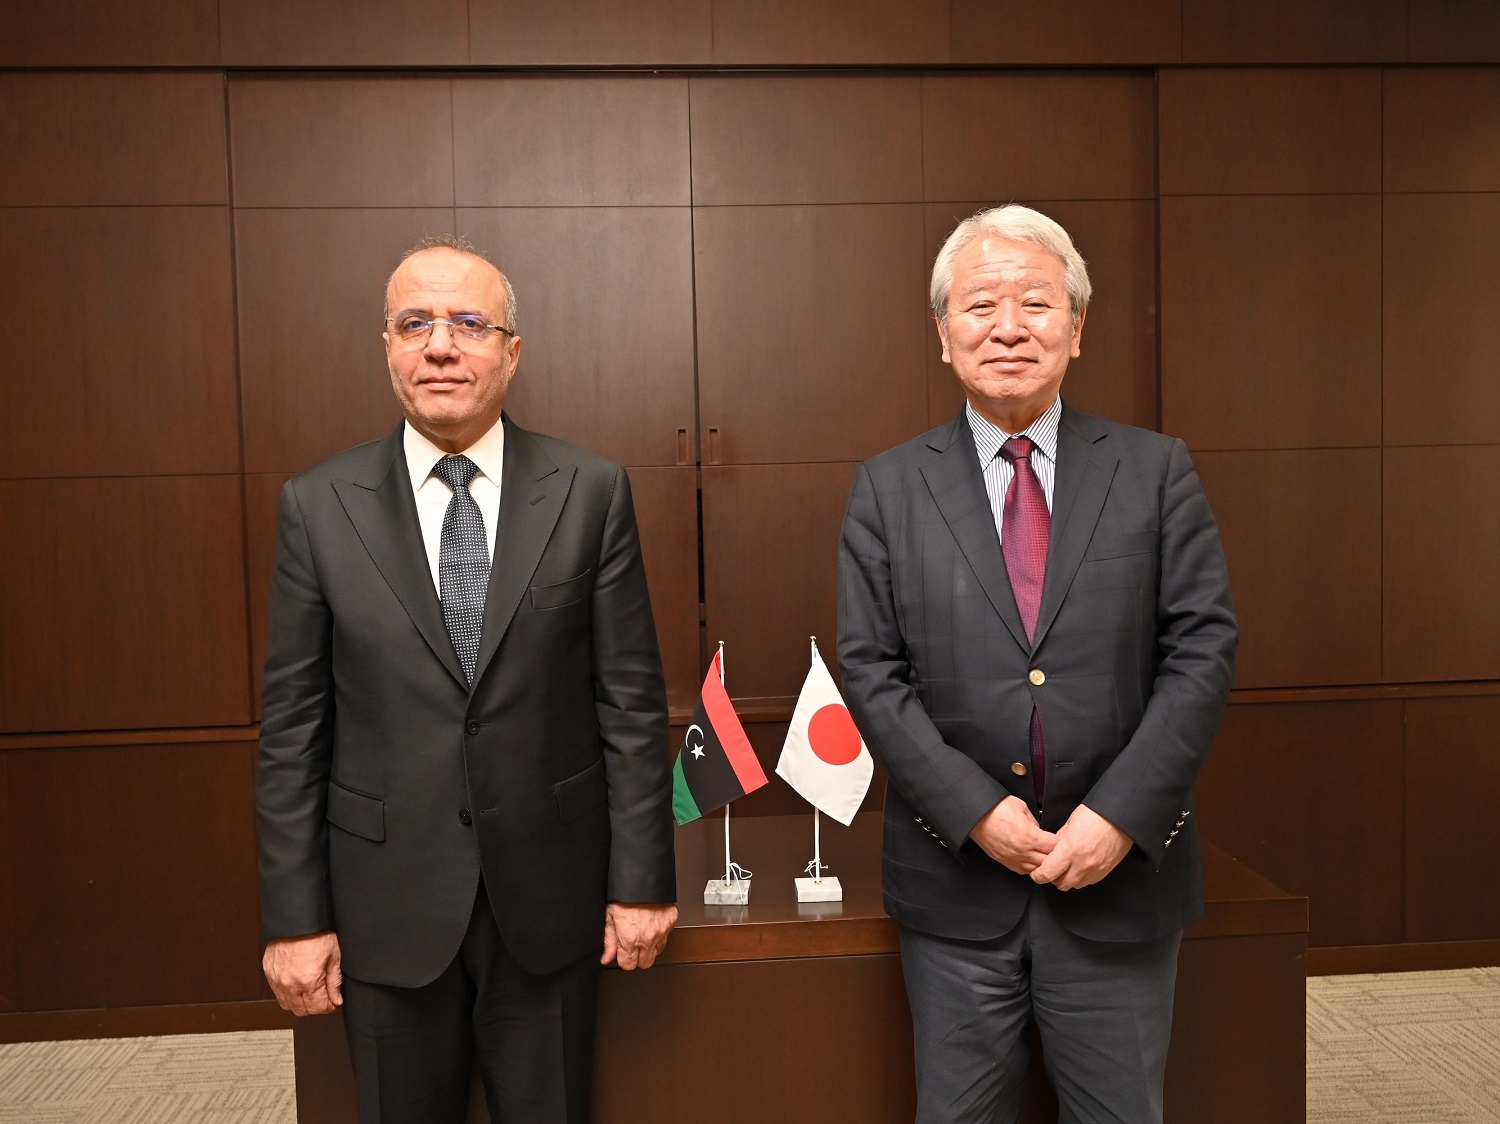 President Tanaka（right) and Vice President of the Presidential Council Alllafi